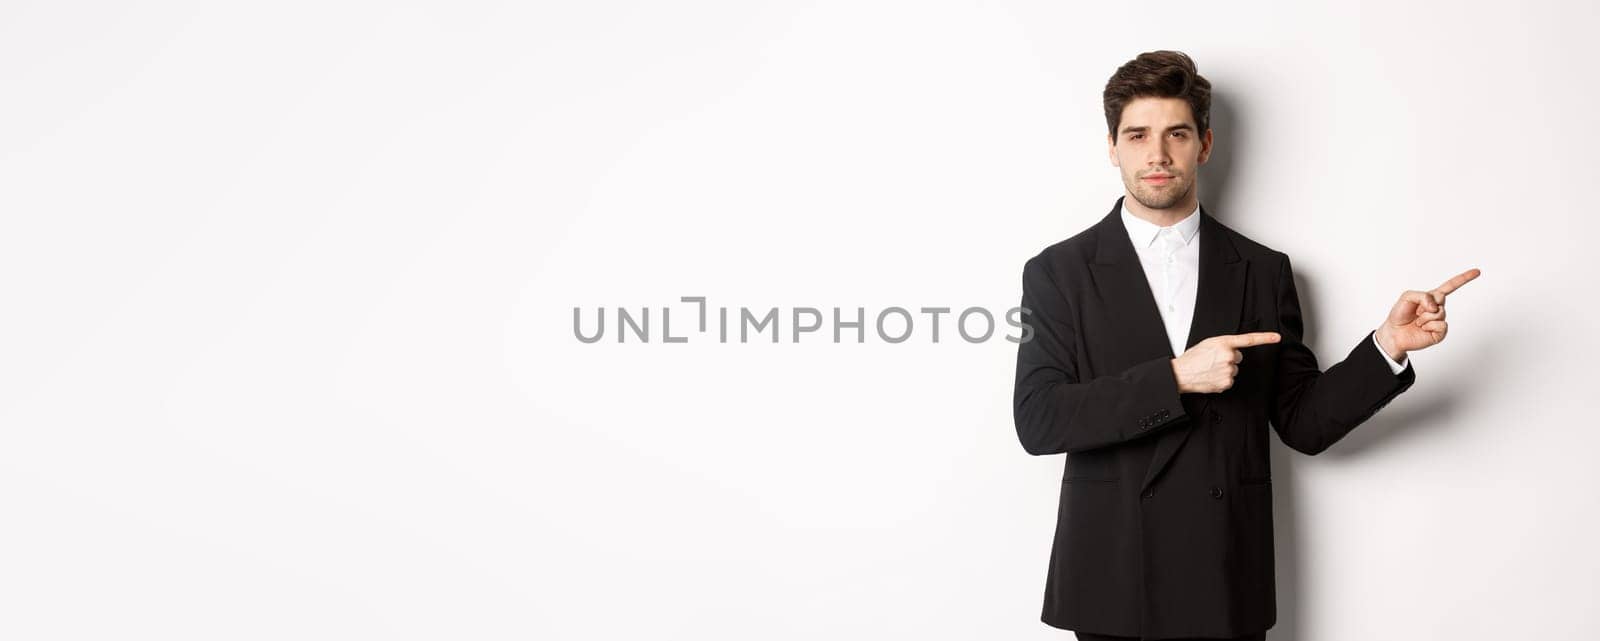 Image of handsome businessman in black suit, pointing fingers right and looking at camera, standing against white background.